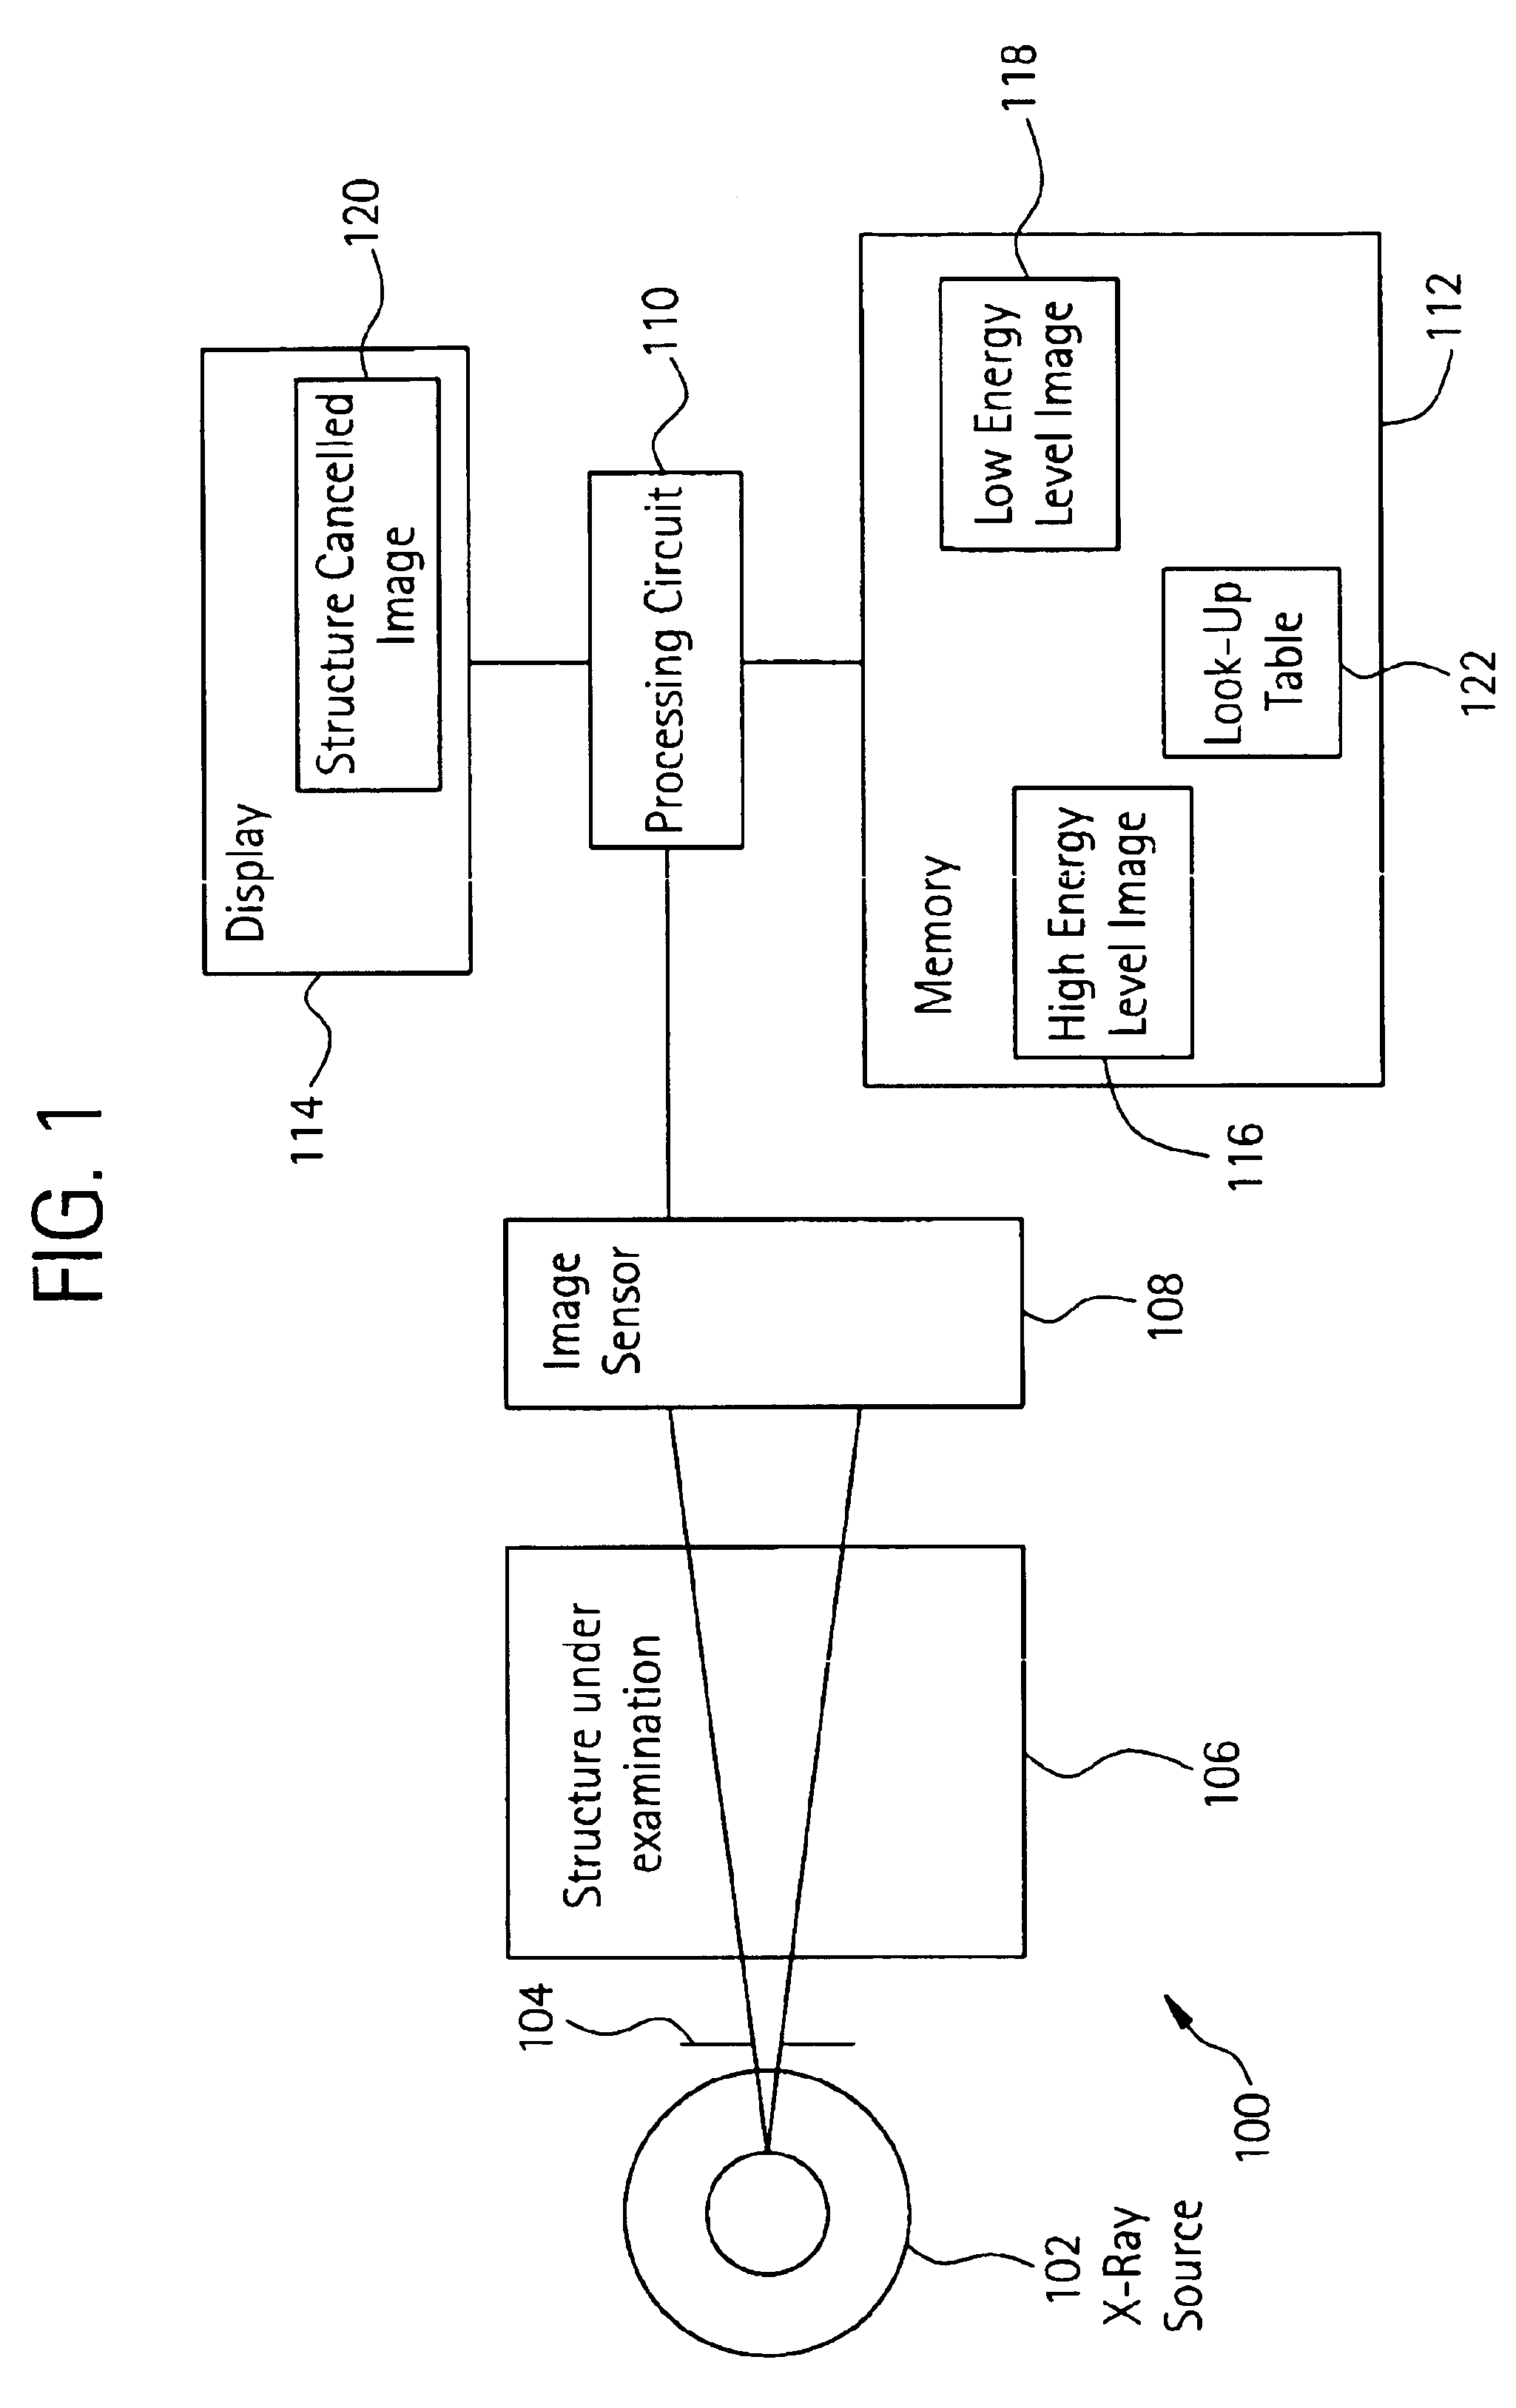 Method and apparatus to automatically determine tissue cancellation parameters in X-ray dual energy imaging